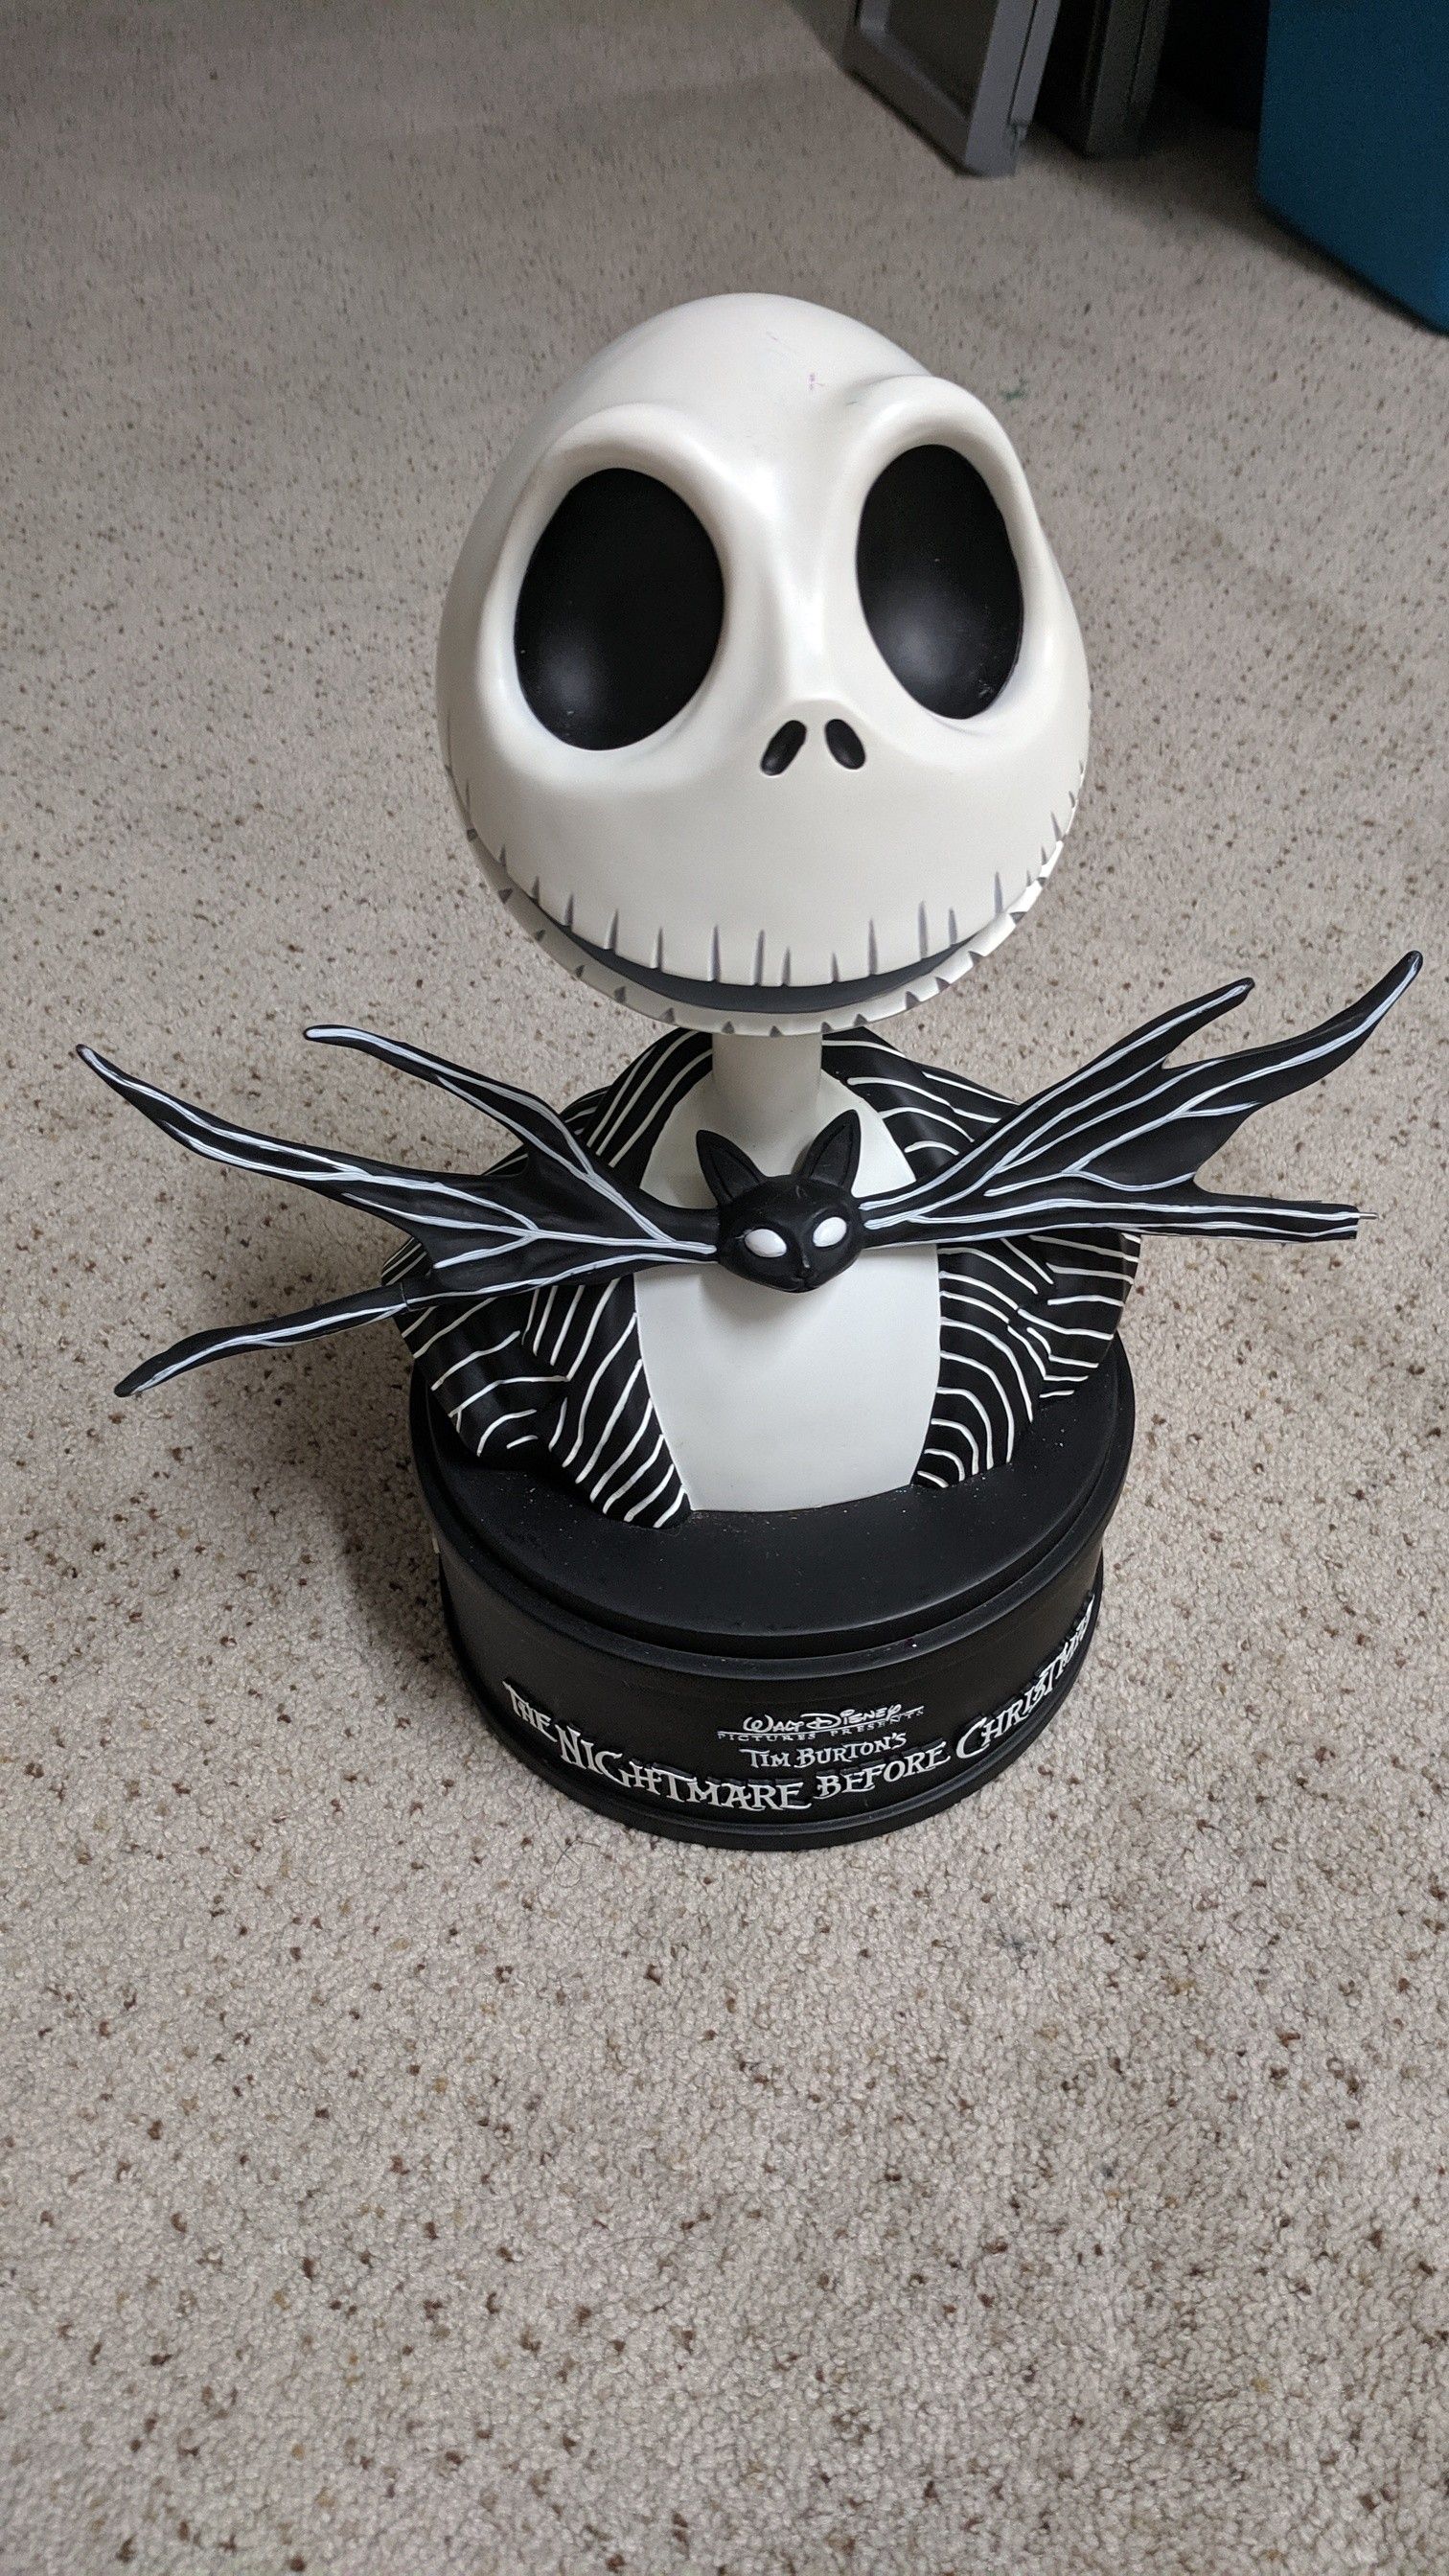 Nightmare Before Christmas - Collectors Edition DVD set